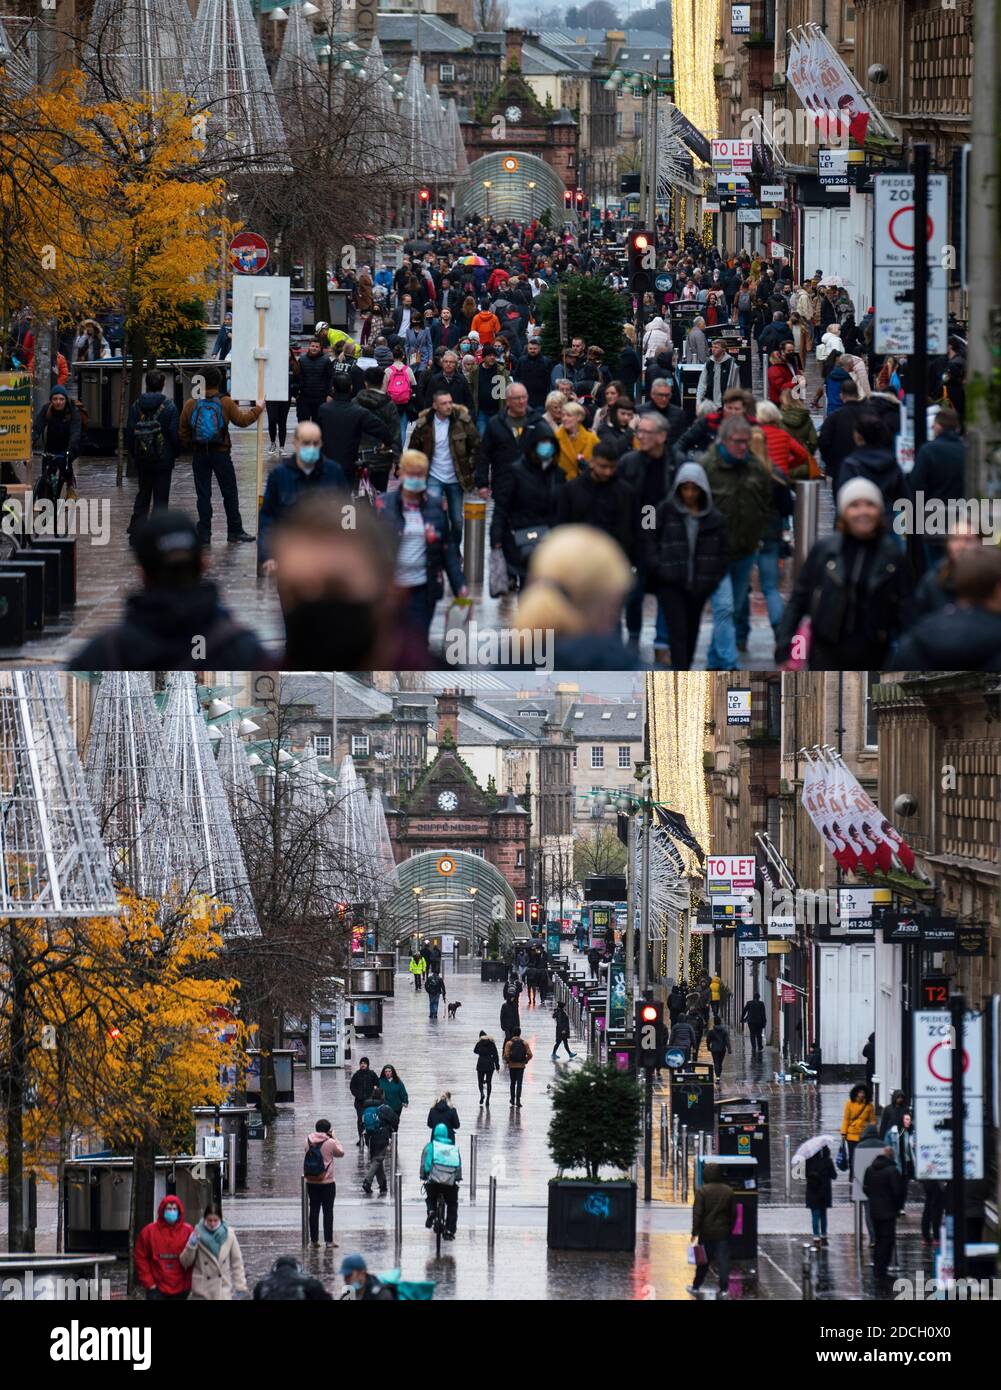 Glasgow, Scotland, UK. 21 November 2020. Two images of Buchanan Street both taken at 1pm on Friday before lockdown and Saturday after lockdown showing the busy Christmas shopping street compared to empty street when shops are close. Iain Masterton/Alamy Live News Stock Photo